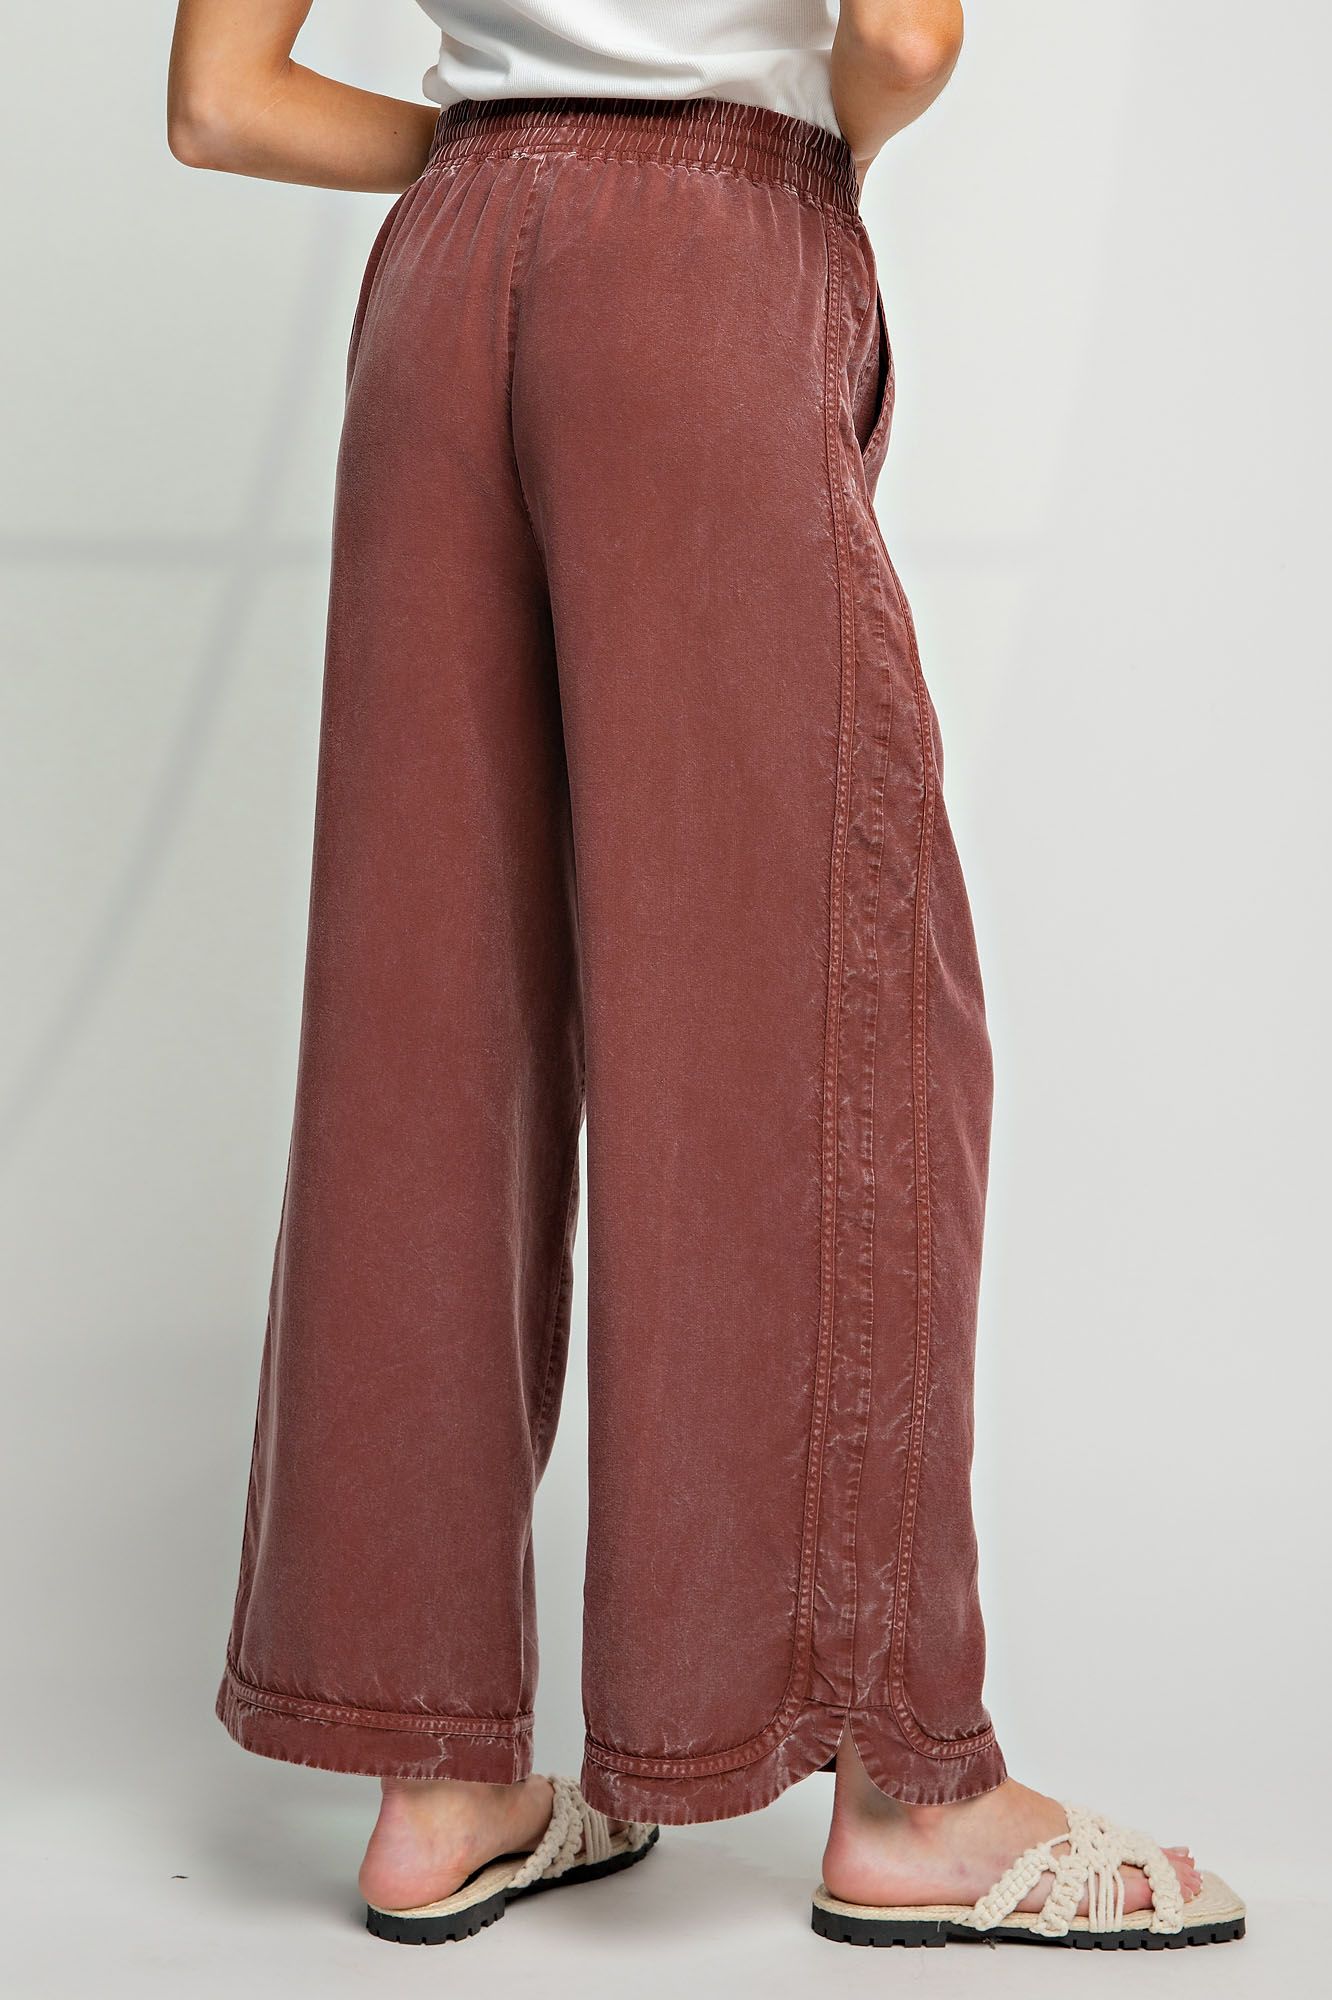 Comfy + Cozy Mineral Washed Soft Twill Wide Leg Pants in Espresso